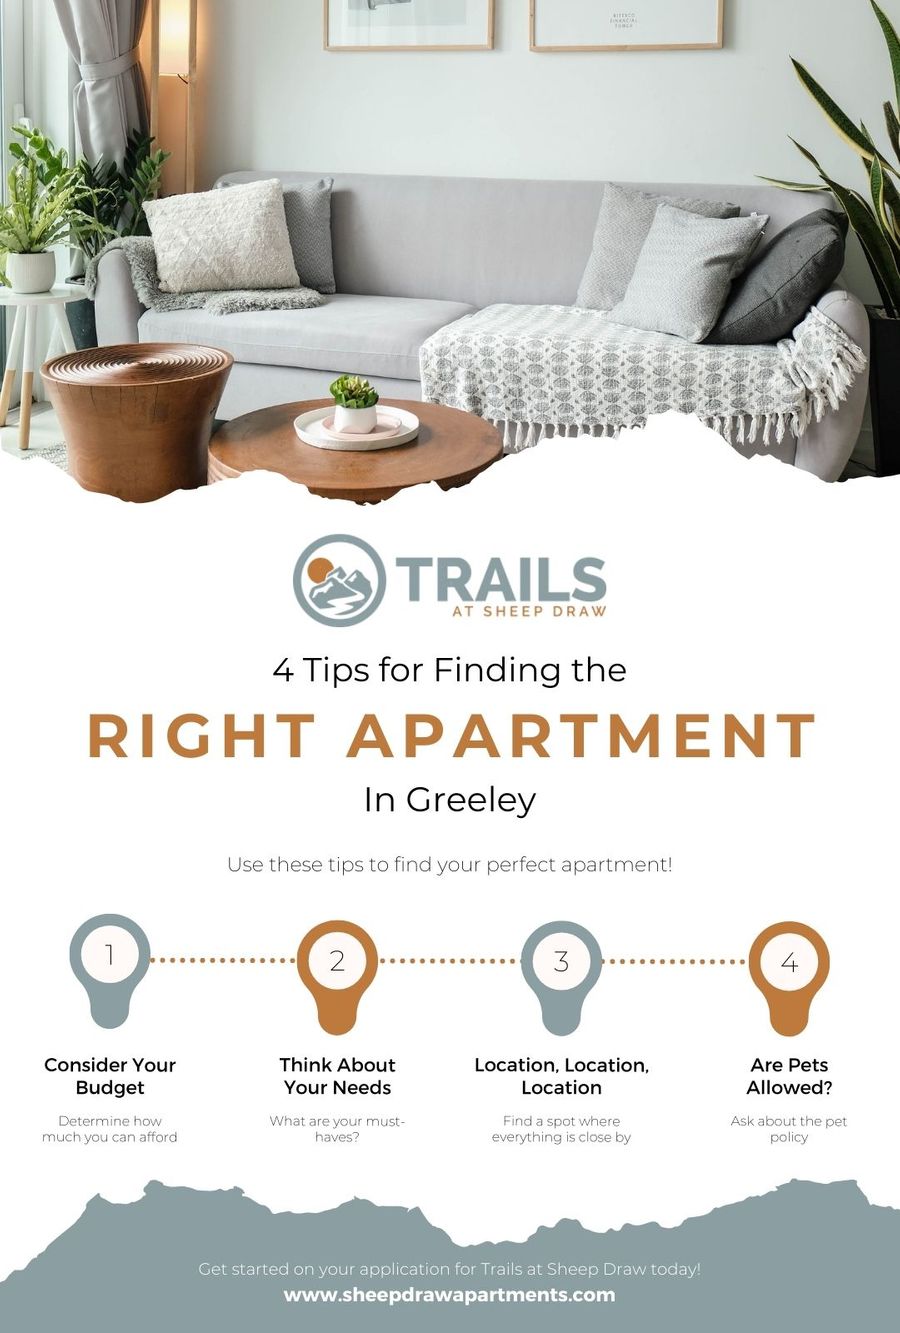 M29173 Trails at Sheep Draw - 4 Tips for Finding the Right Apartment In Greeley.jpg